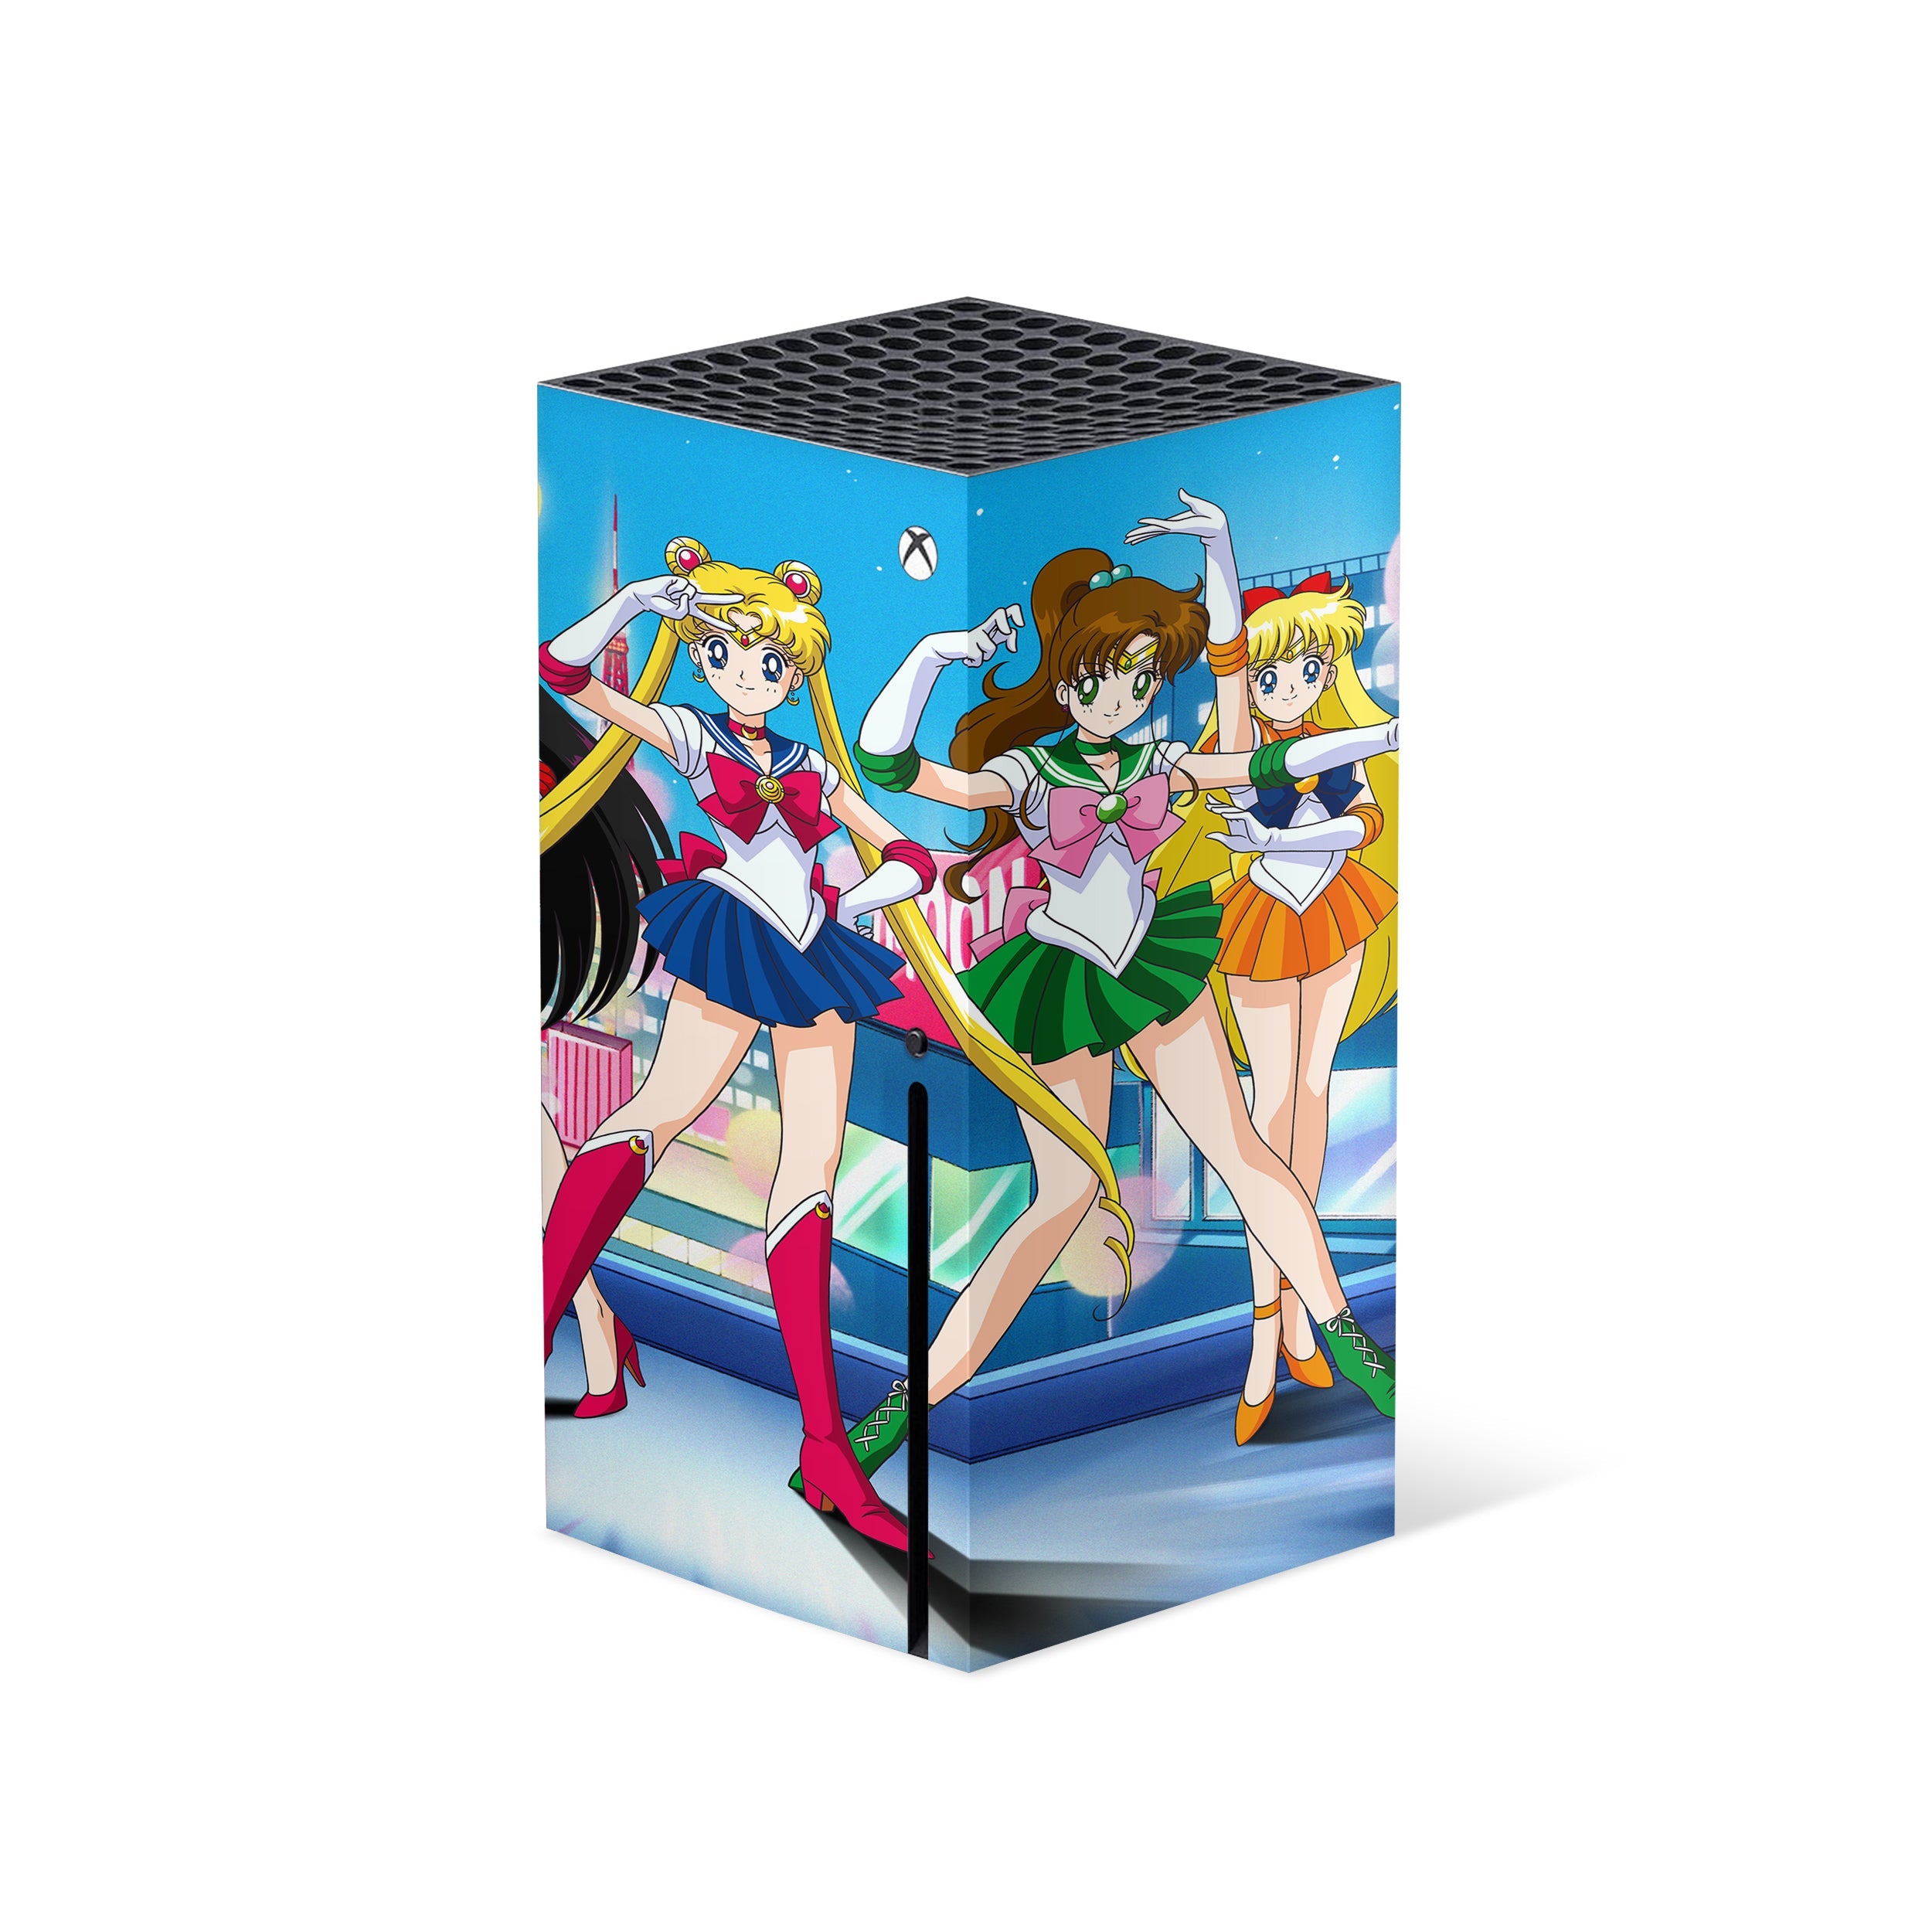 A video game skin featuring a Sailor Moon design for the Xbox Series X.